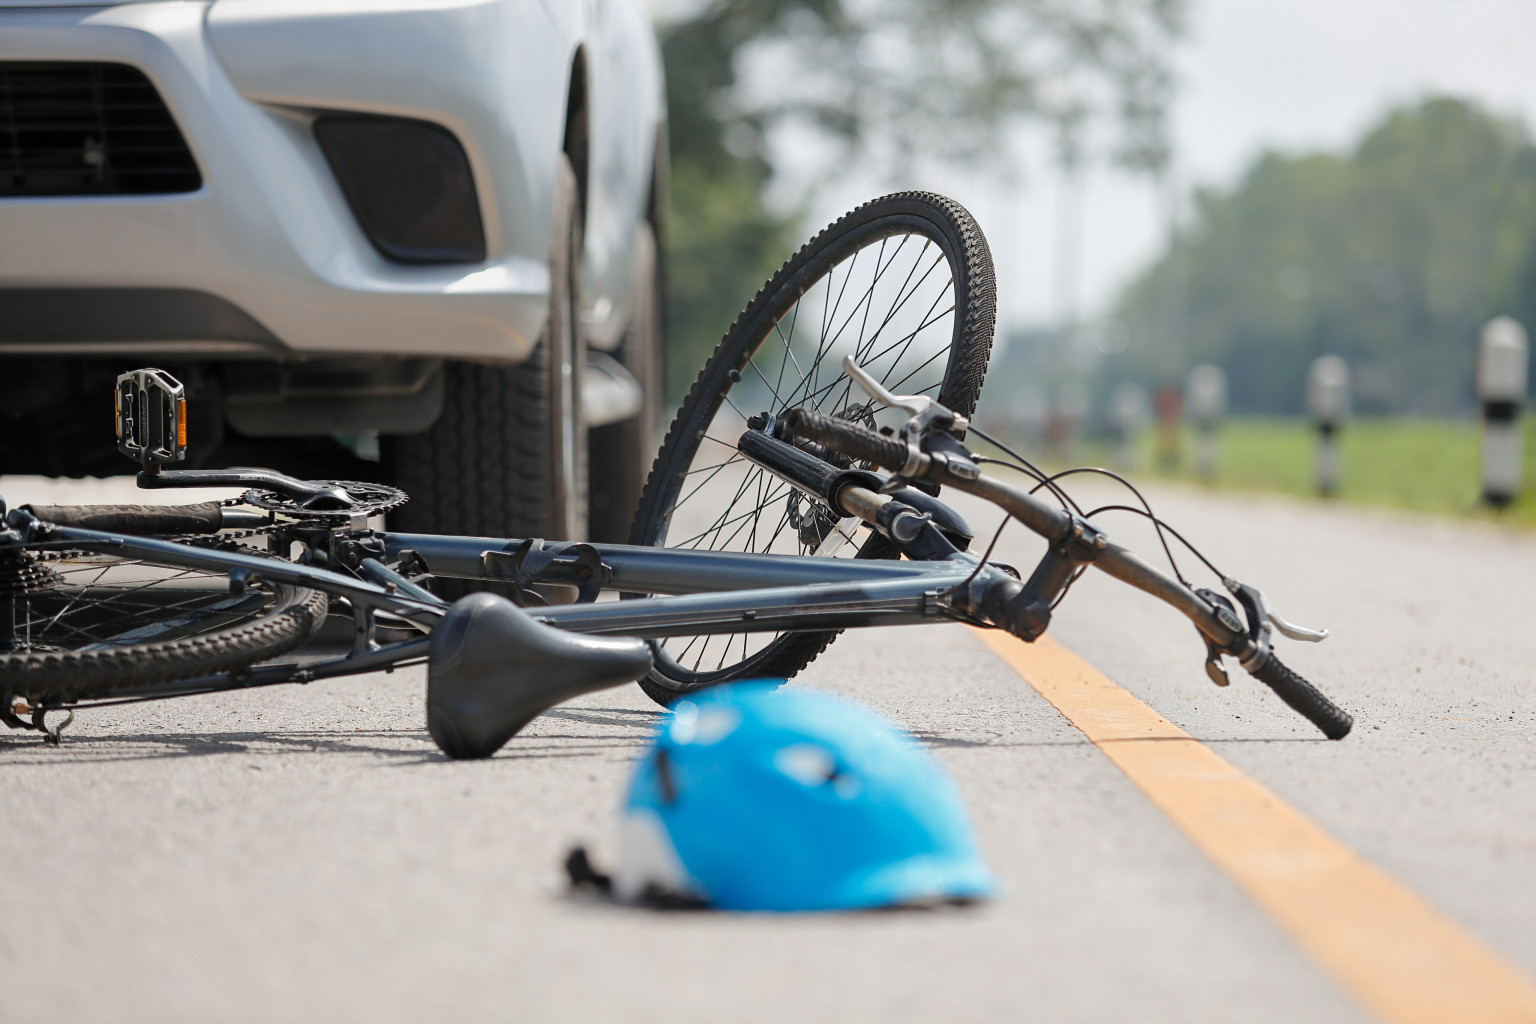 Scene of a bicycle accident.